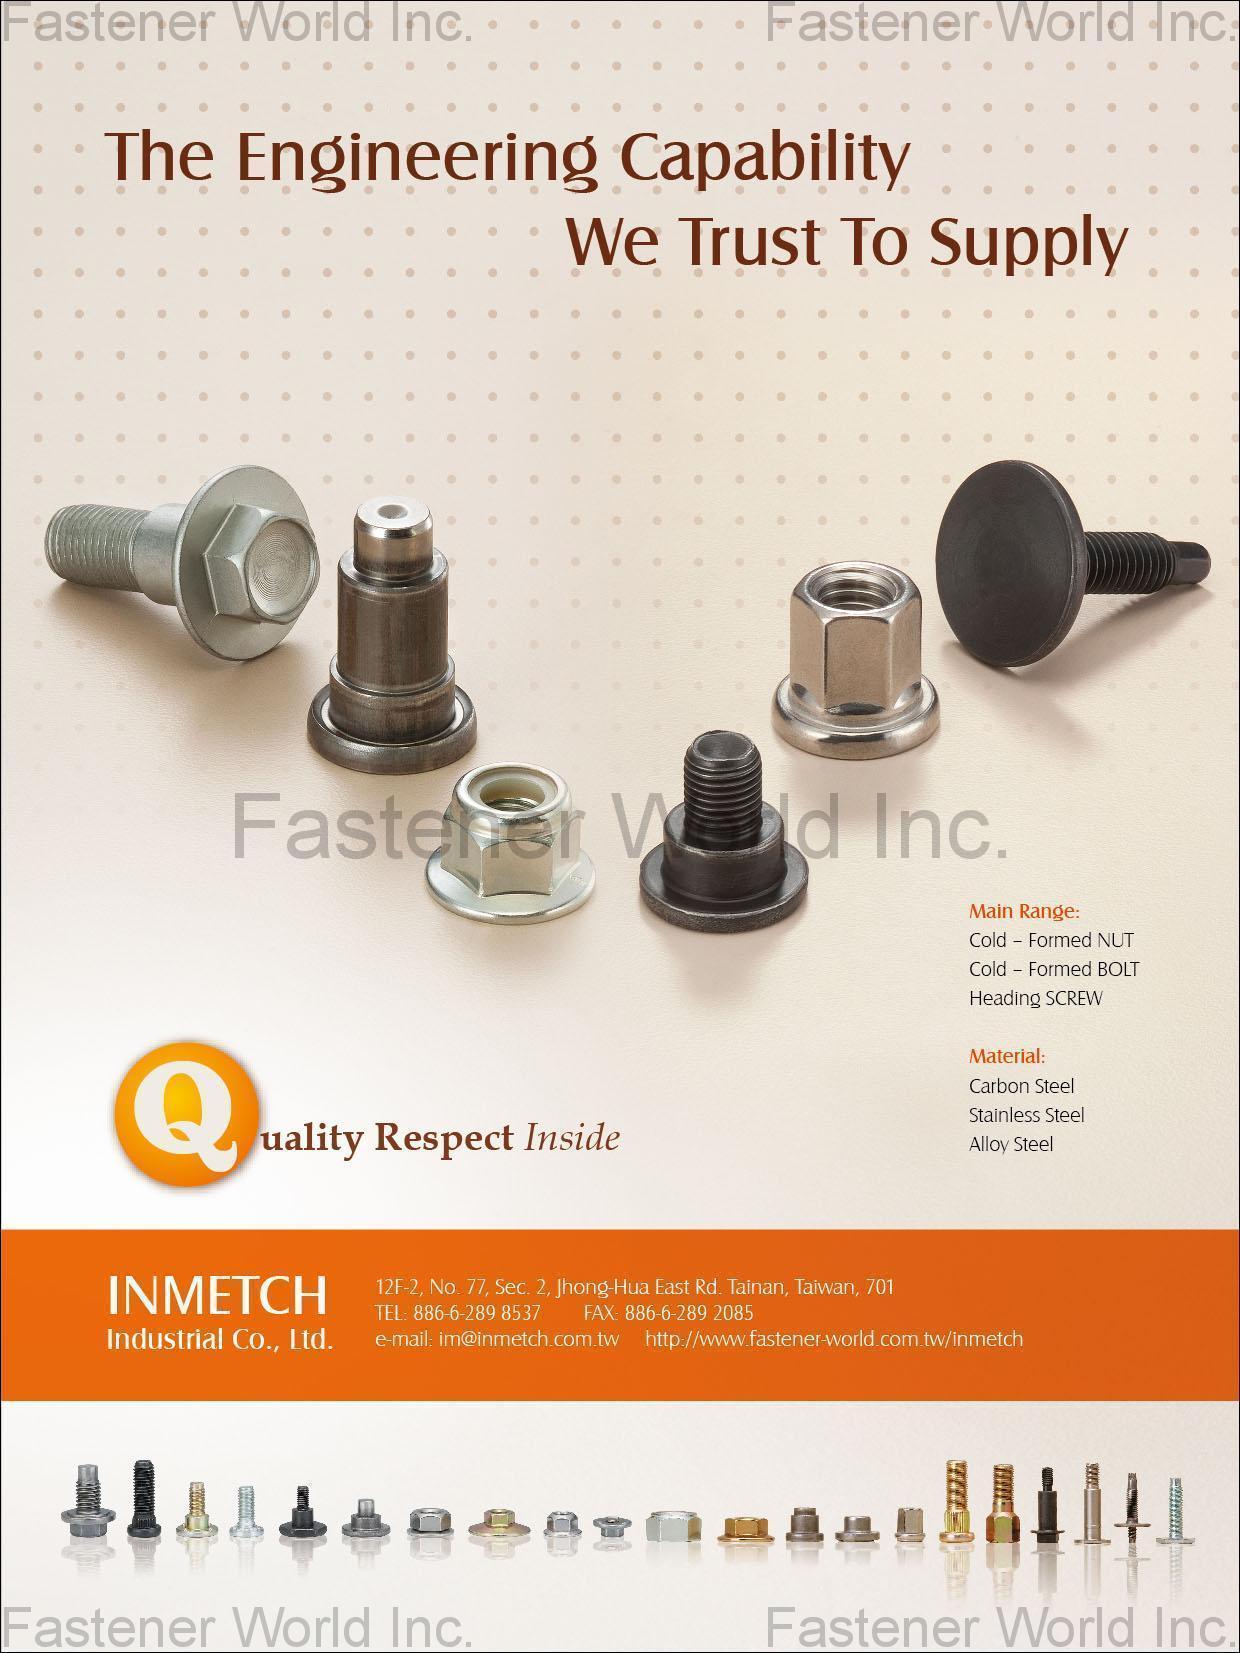 INMETCH INDUSTRIAL CO., LTD.  , Cold-Formed Nuts, Cold Formed Bolts, Heading Screws , Cold Forged Nuts